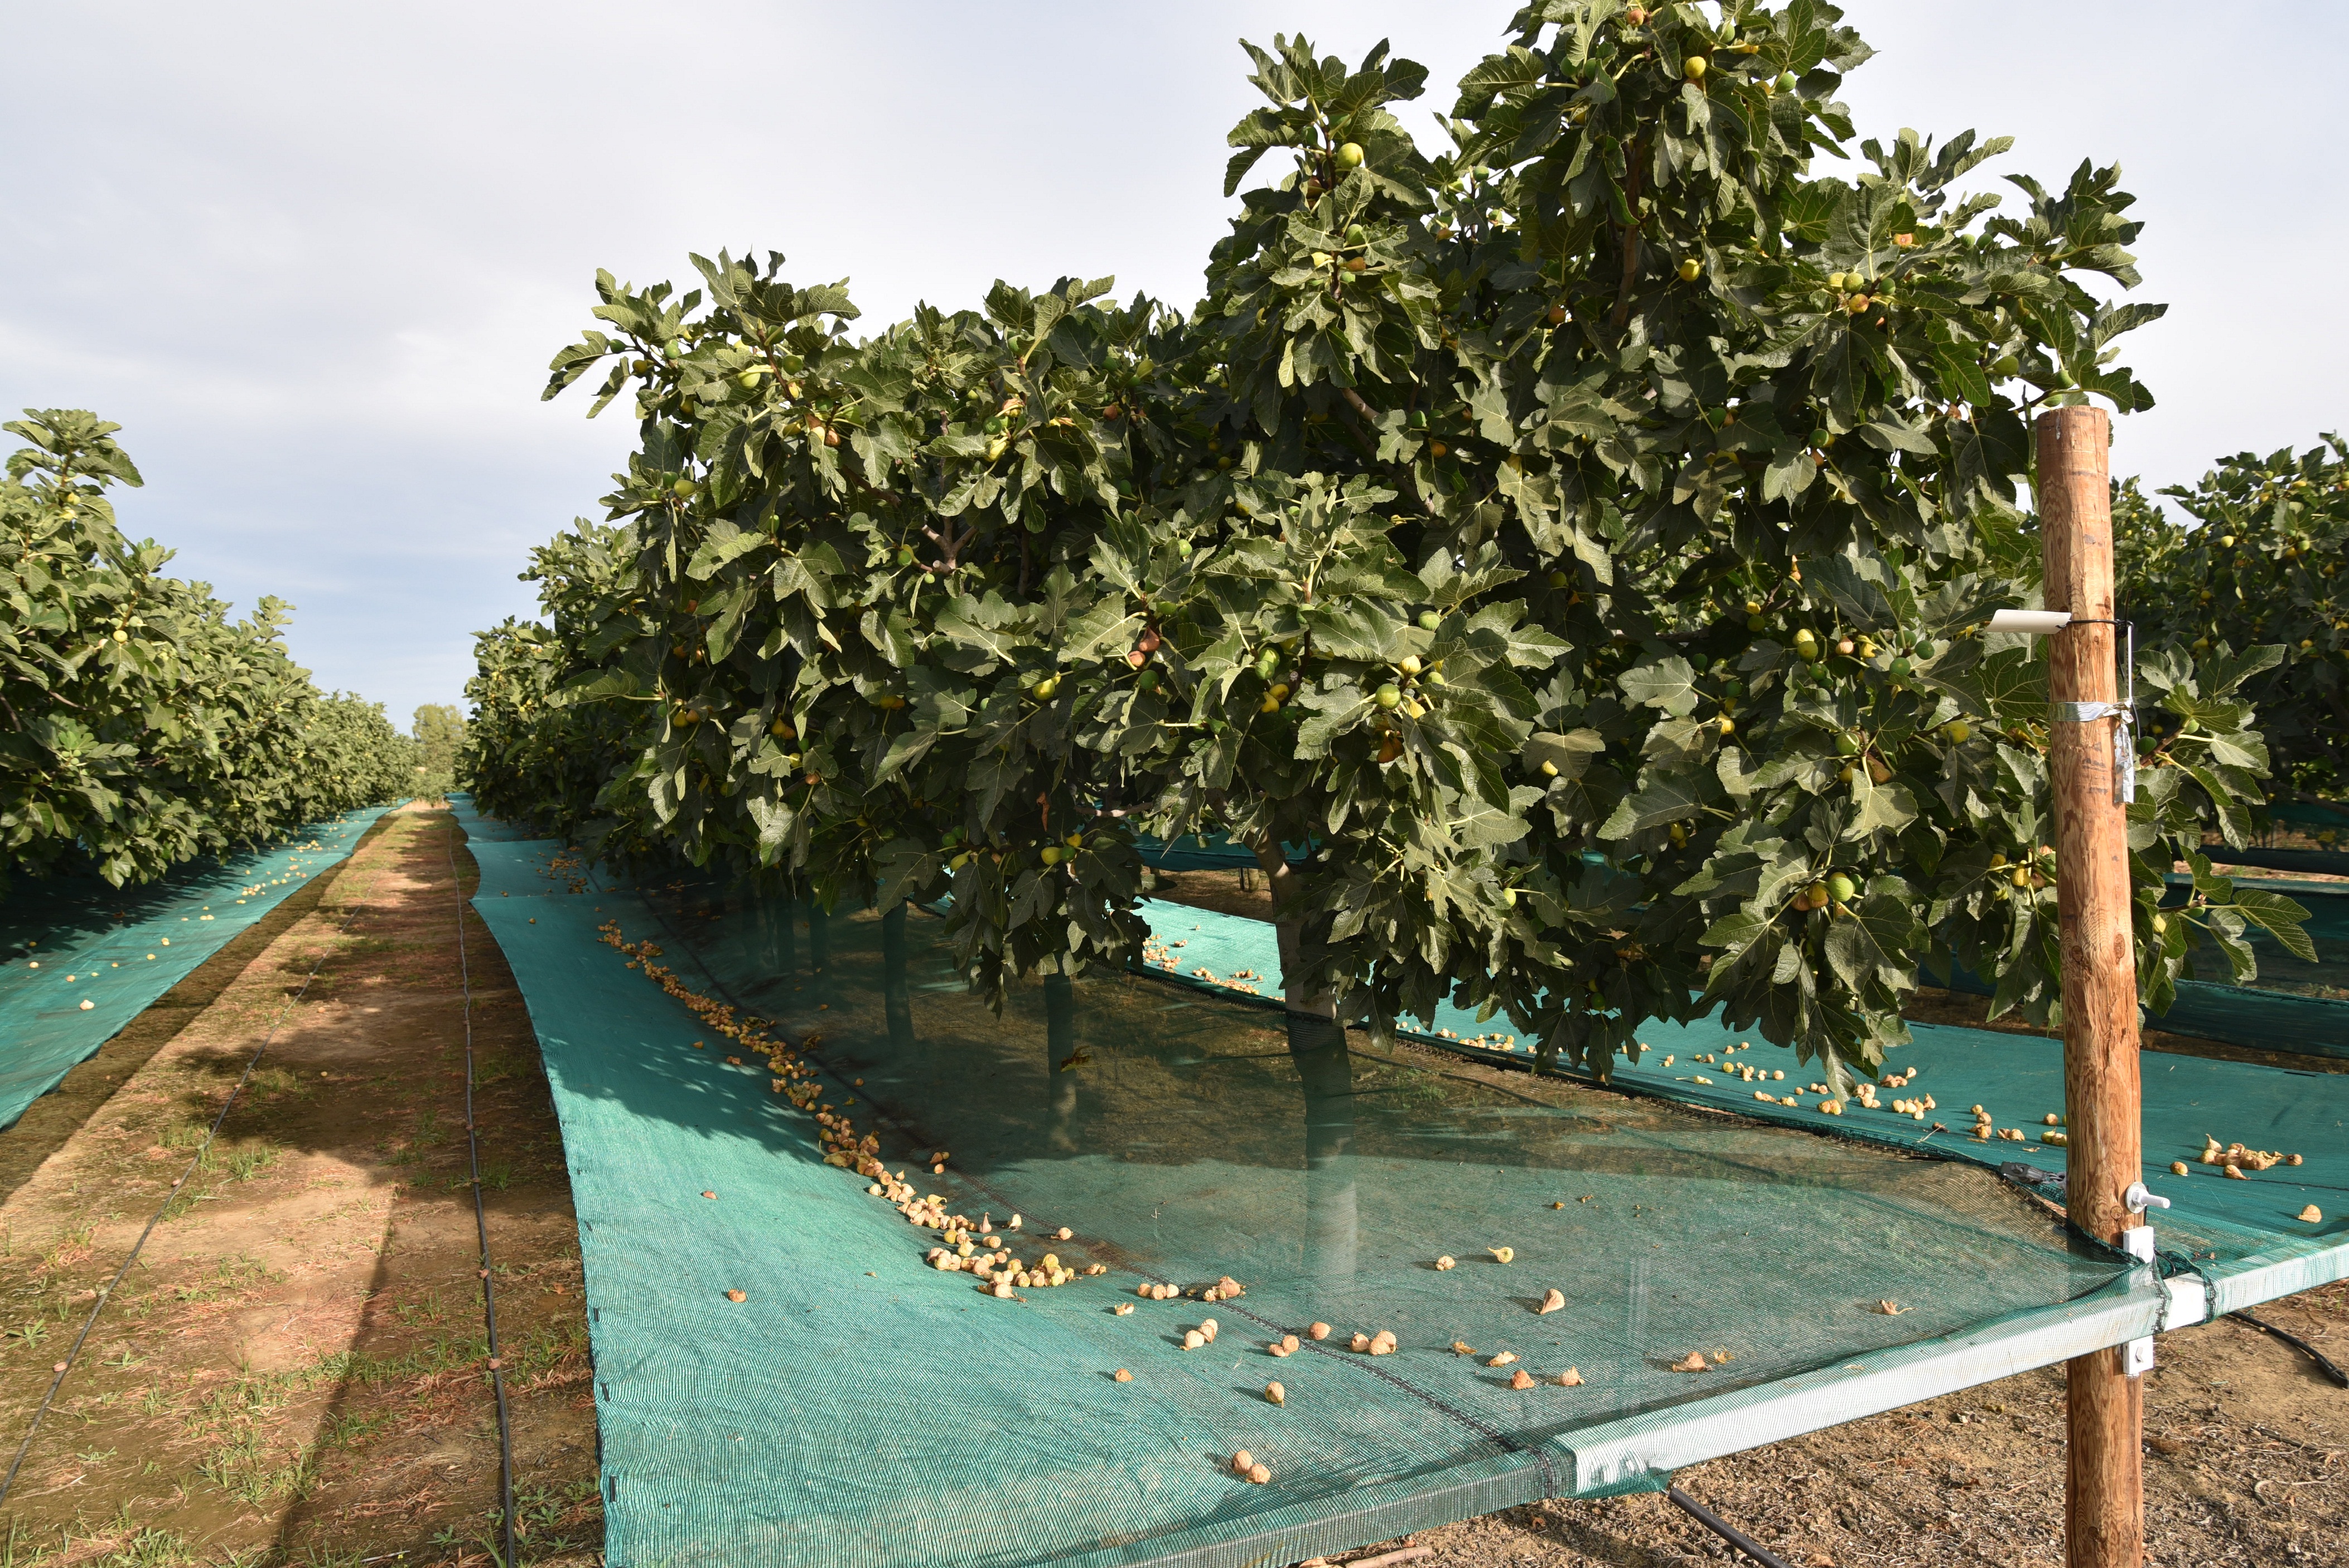 Trial for dried fig with harvesting nets